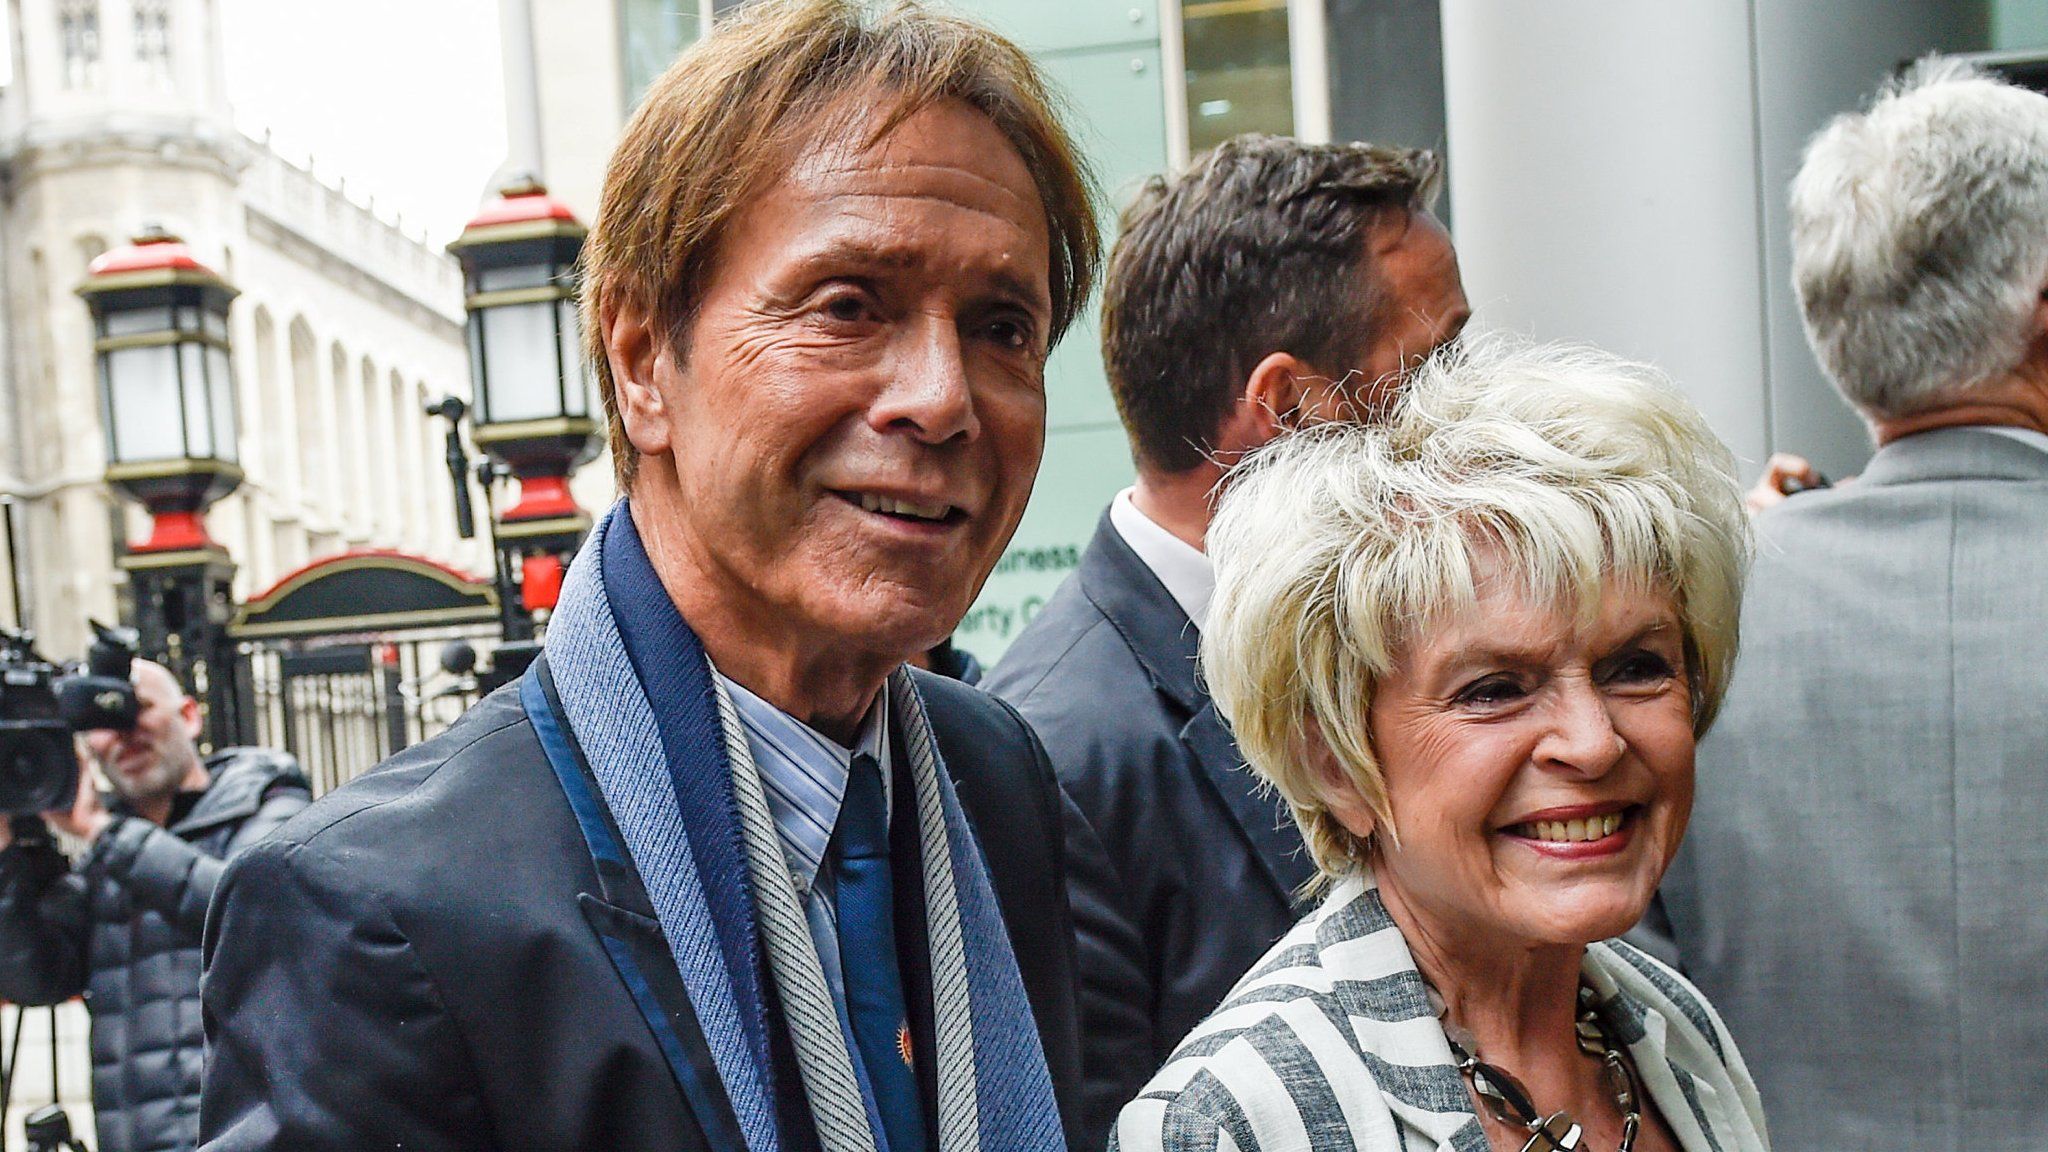 Sir Cliff Richard arriving at the High Court with Gloria Hunniford on 13 April 2018